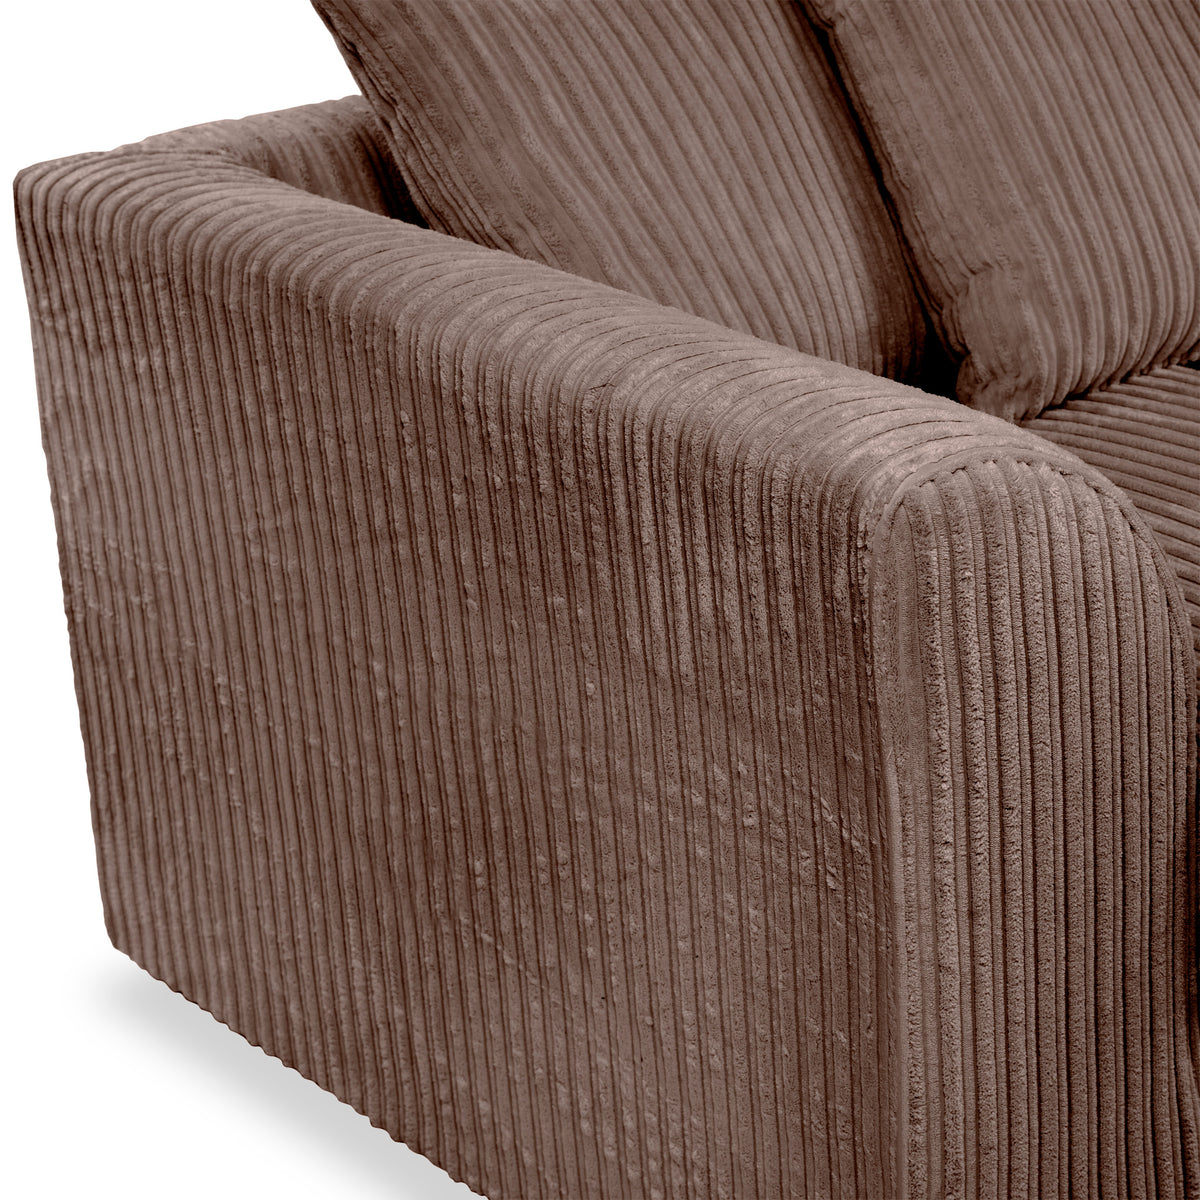 Bletchley Chocolate Left Hand Jumbo Cord Chaise Sofa from Roseland Furniture